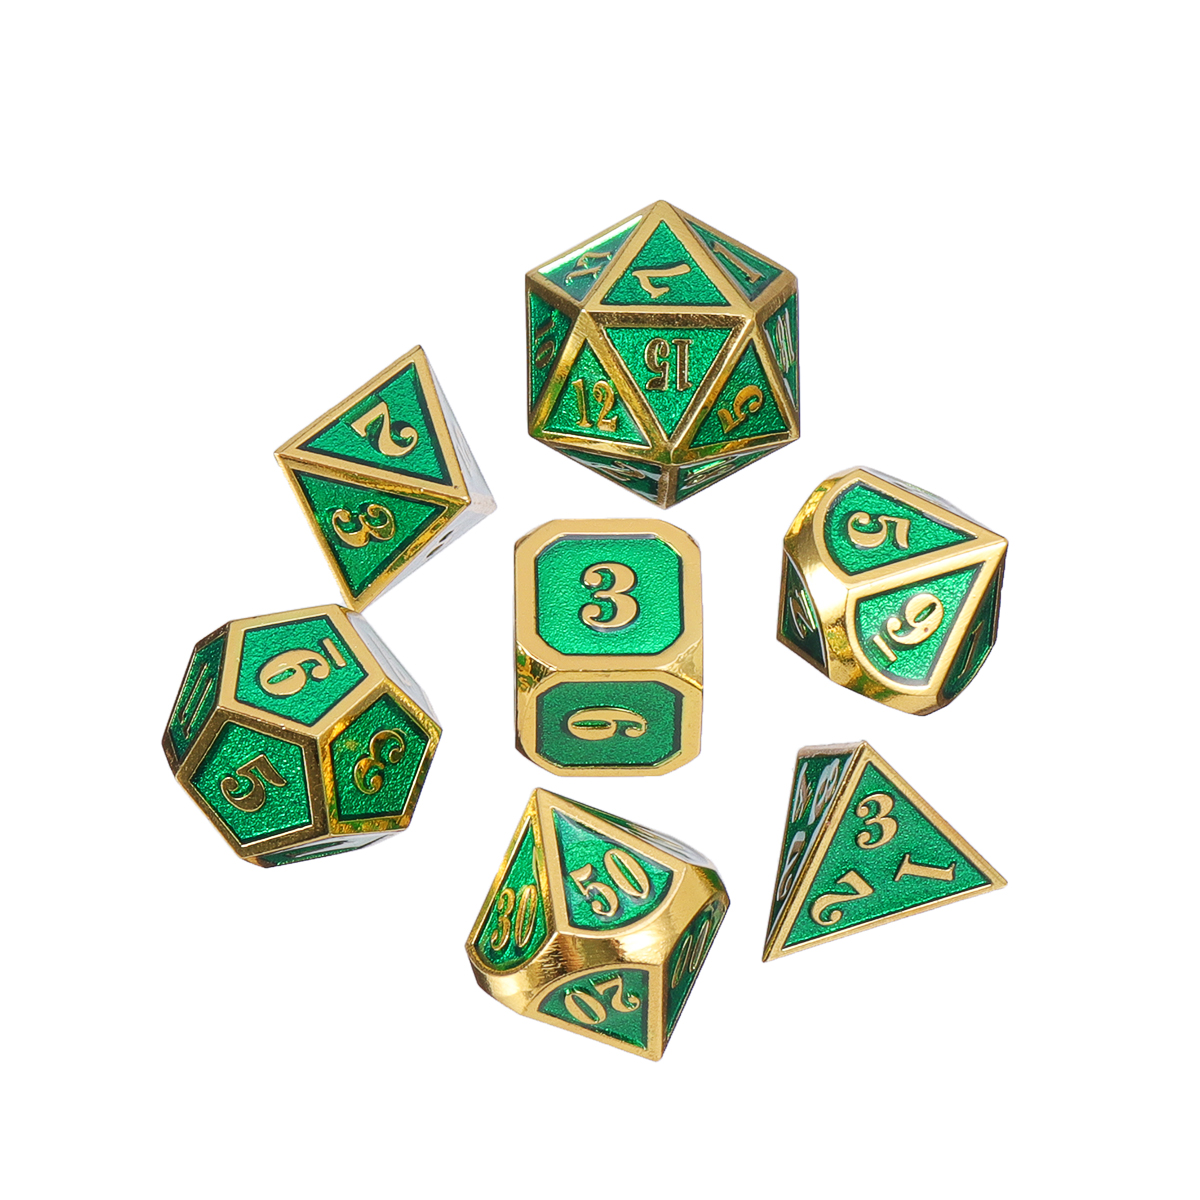 7Pcs-Heavy-Duty-Metal-Polyhedral-Dices-Set-Multisided-Dice-Antique-RPG-Role-Playing-Game-Dices-1371263-7